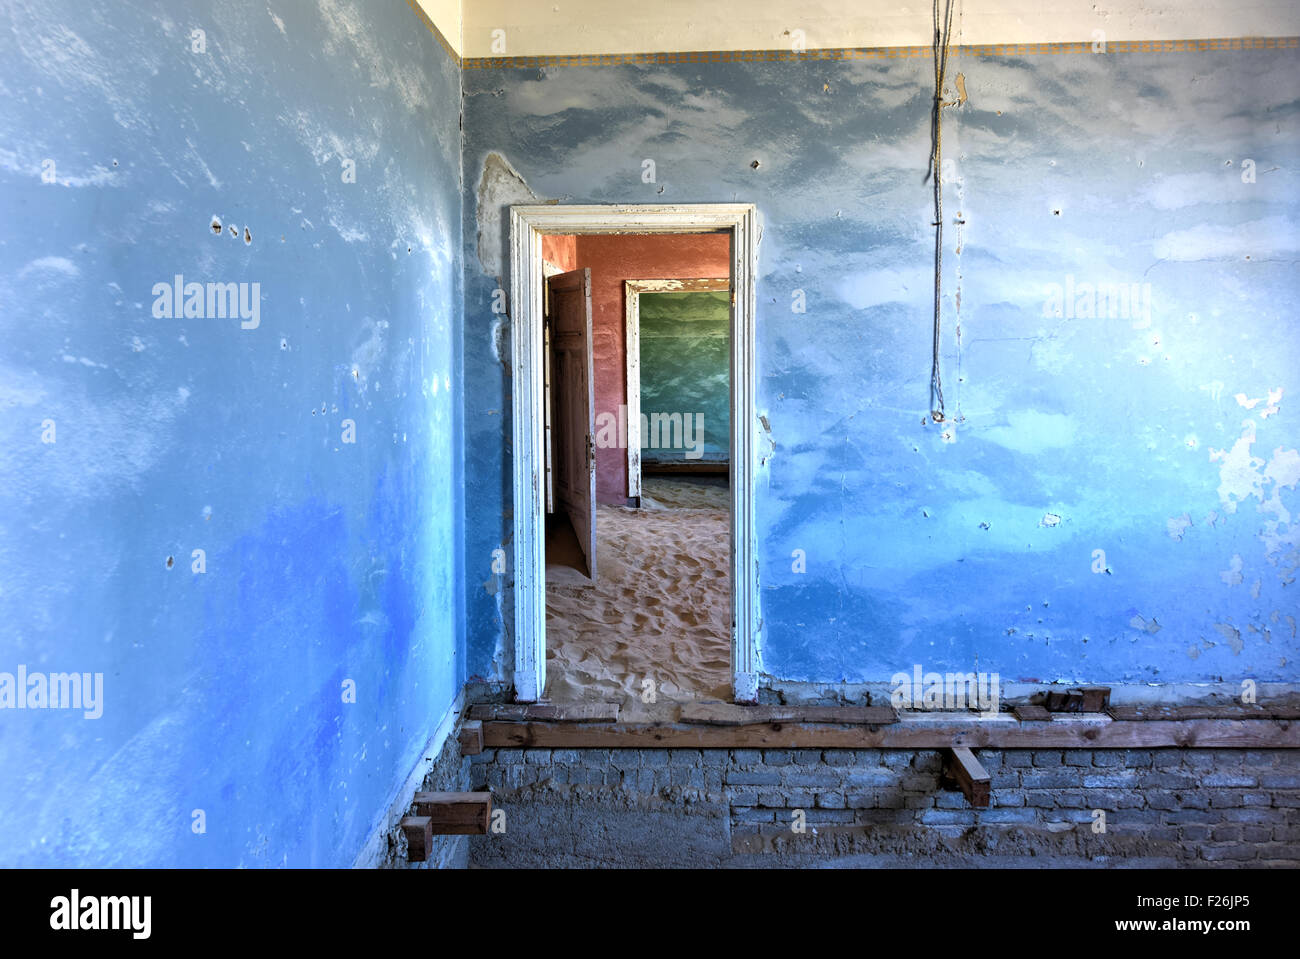 The abandoned ghost diamond town of Kolmanskop in Namibia, which is slowly being swallowed by the desert. Stock Photo